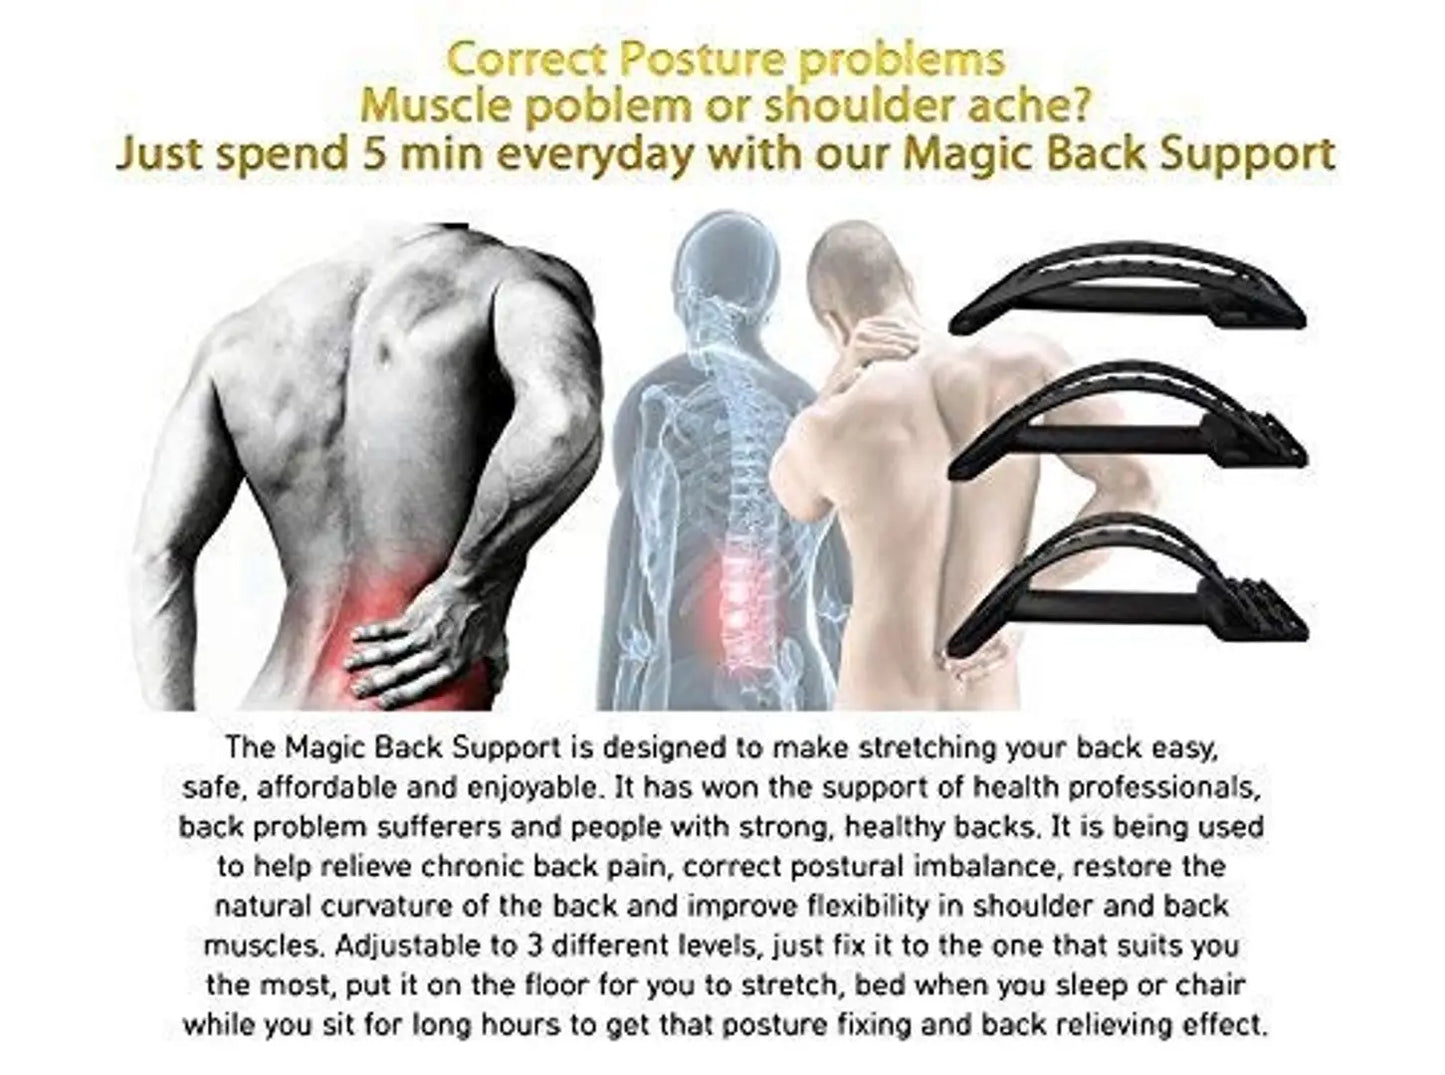 Lumbar Back Stretcher, for Lower and Upper Back Massager and Support Back Tool, Lumbar Support for Office Chair